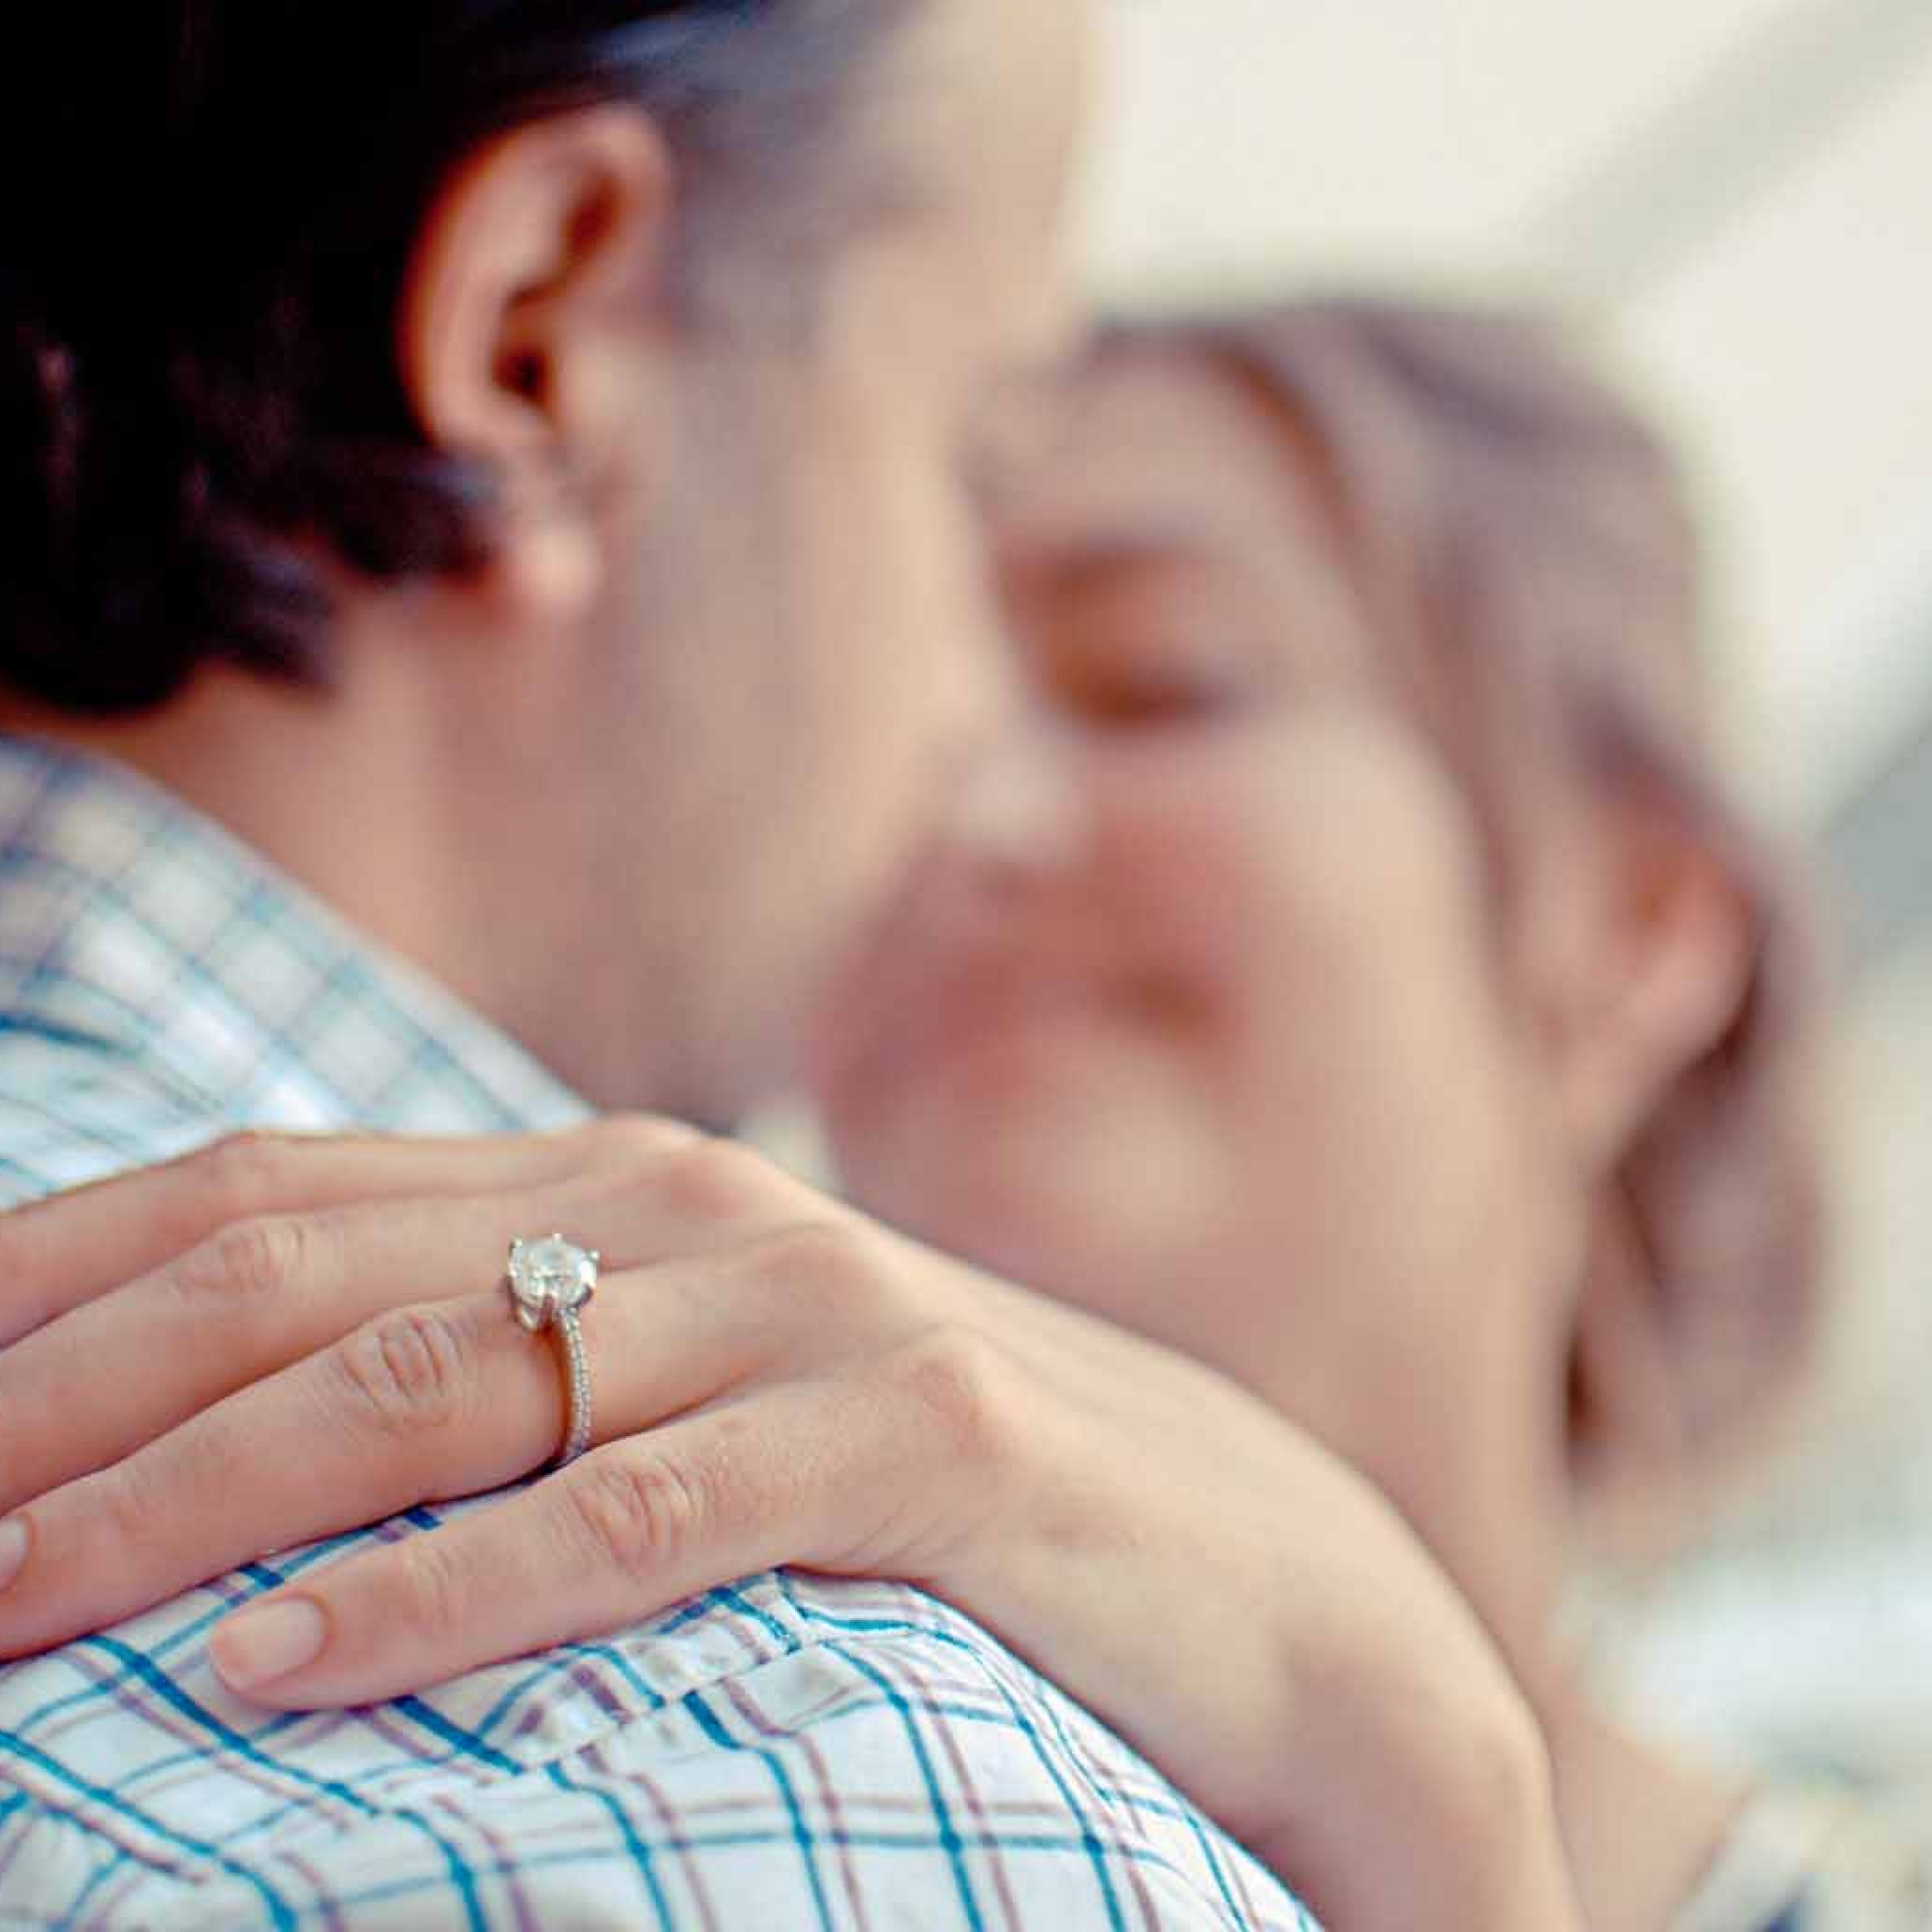 Remarriage—5 Tips for How to Make it Work